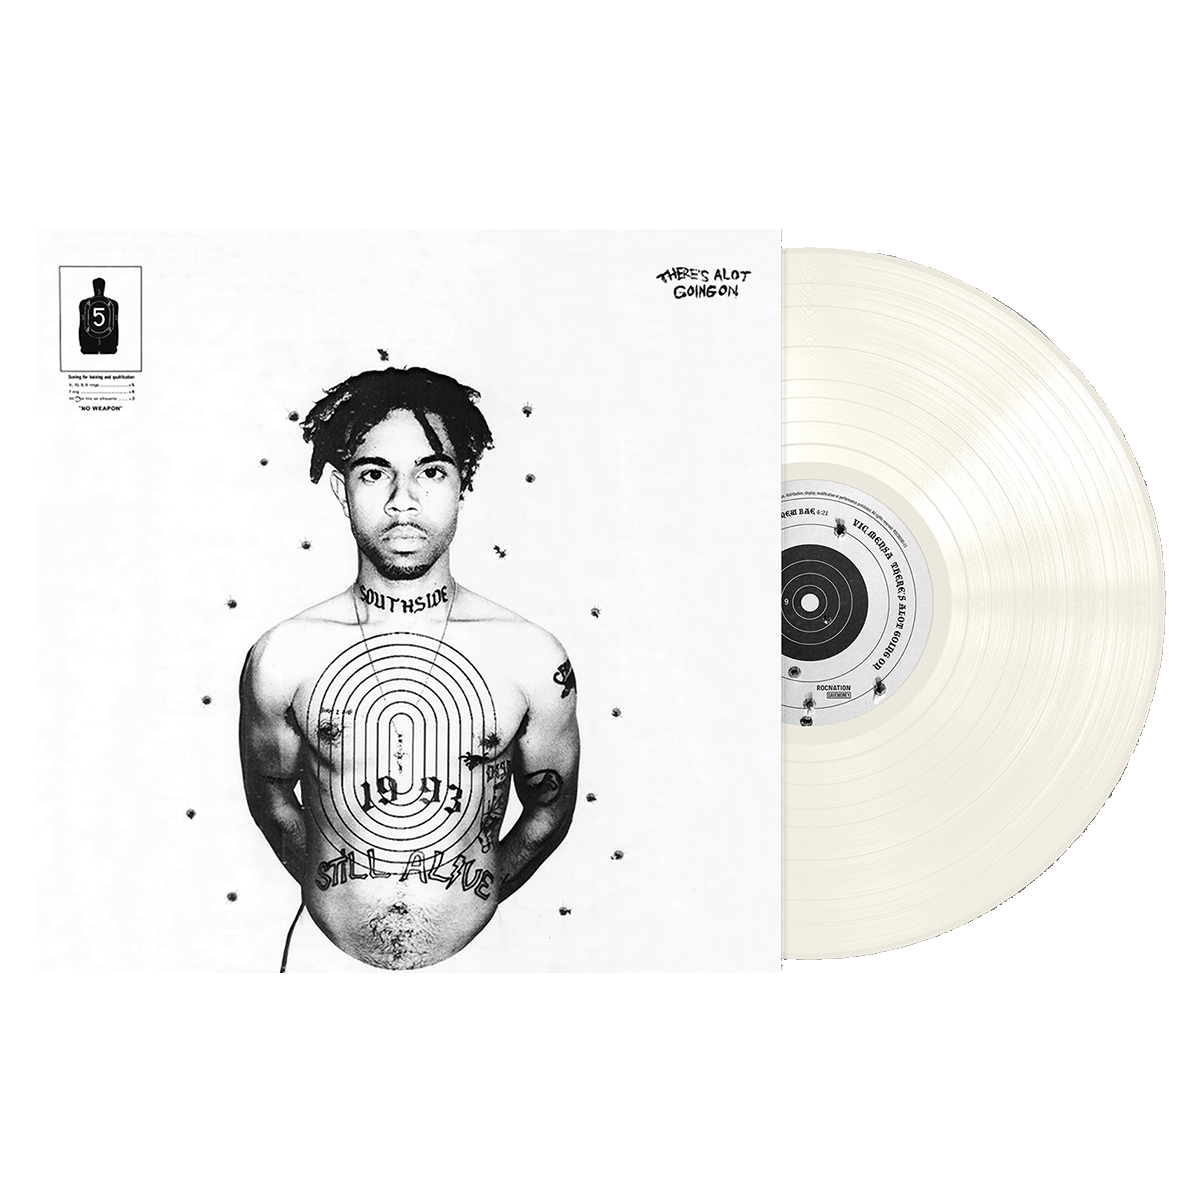 There's Alot Going On White Vinyl LP